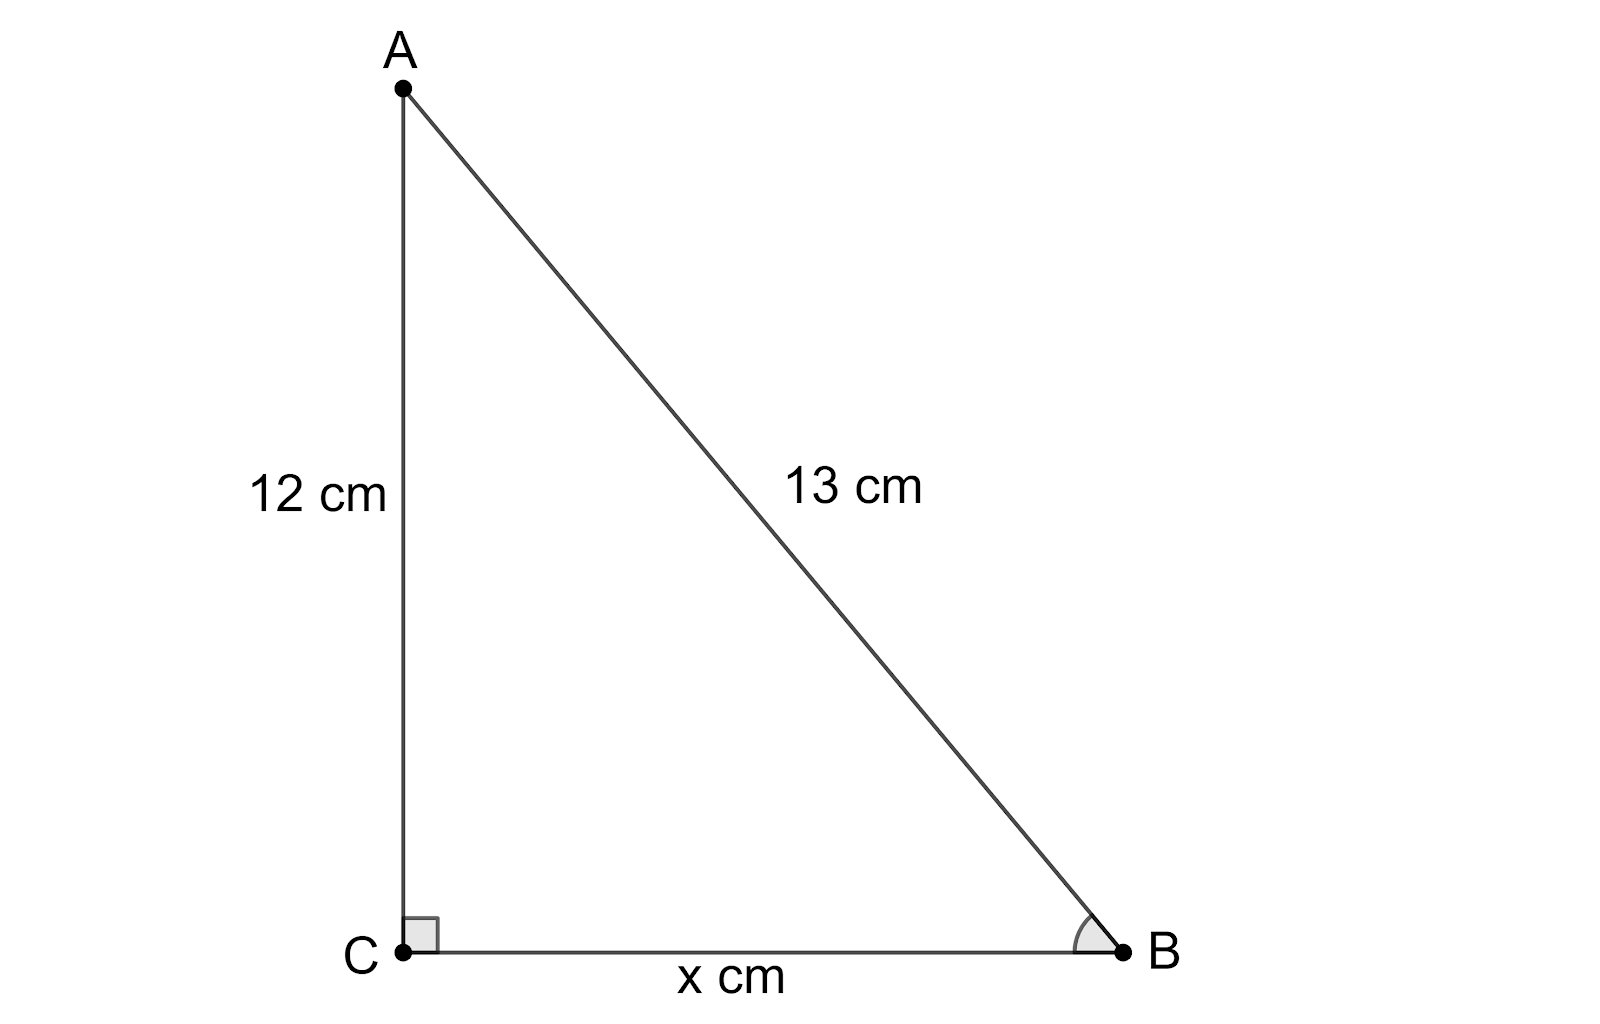 the-diagram-shows-a-right-angled-triangle-the-lengths-of-the-sides-are